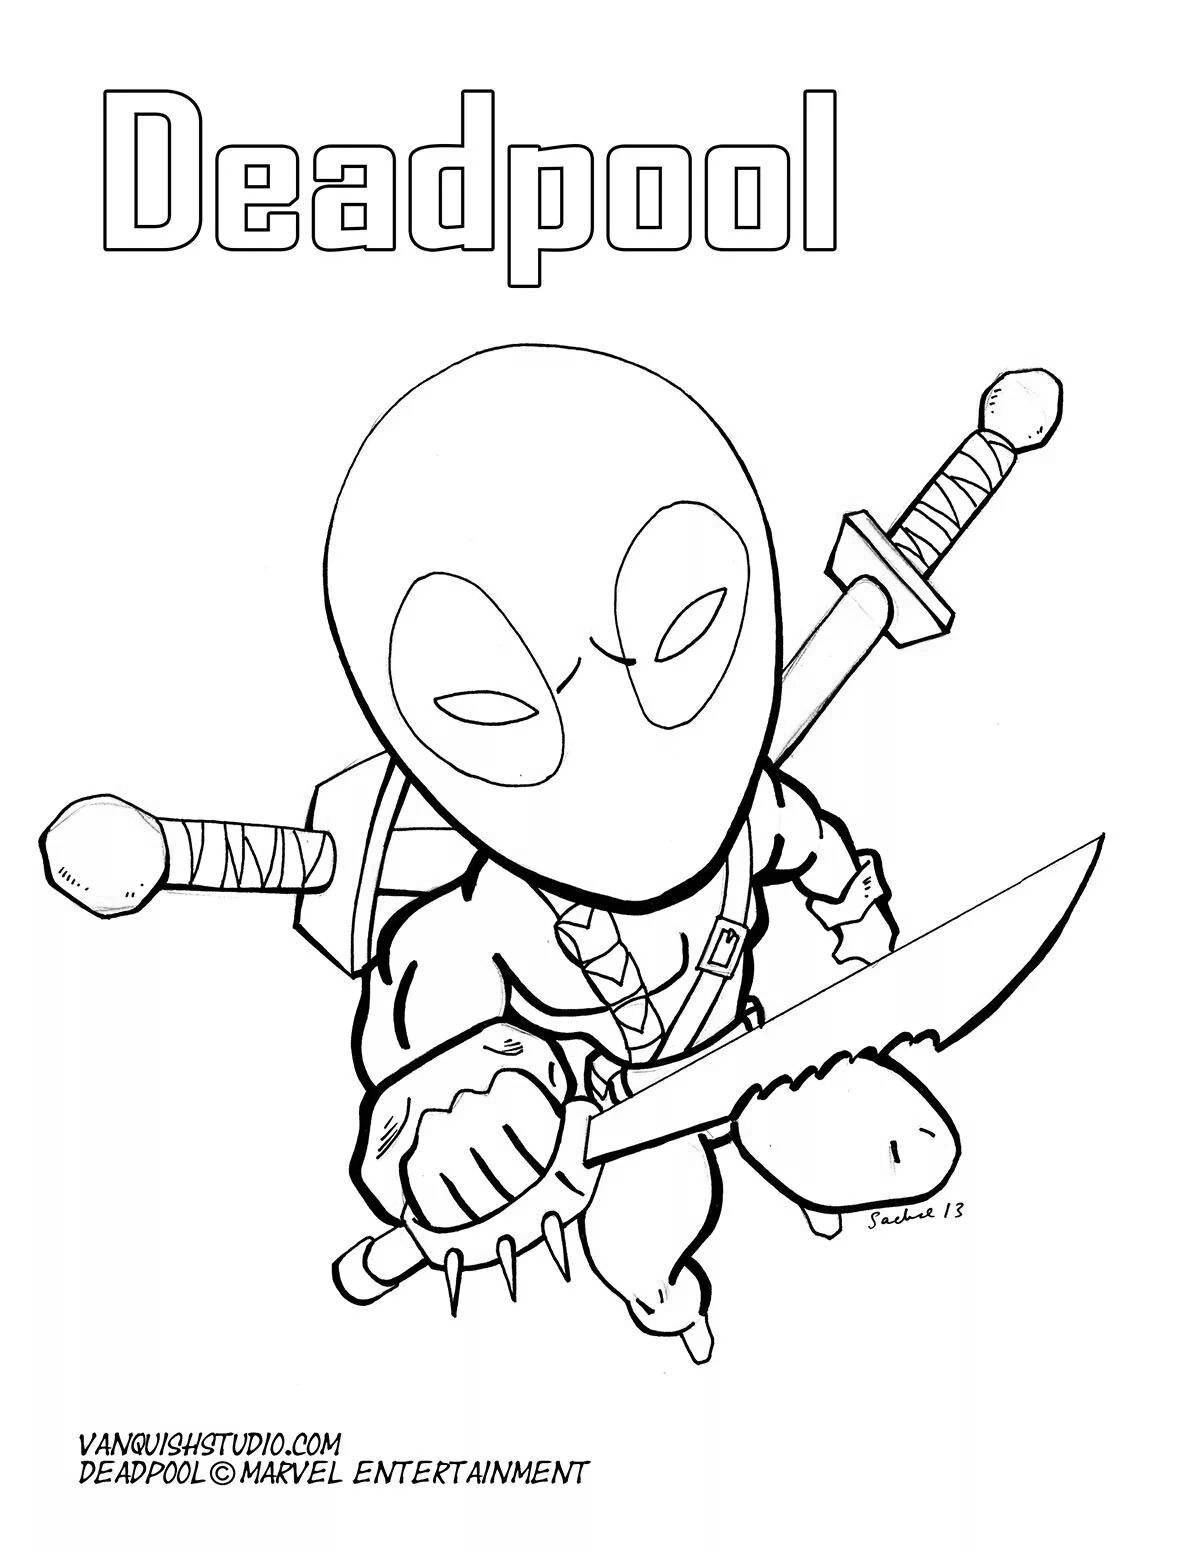 Great coloring book for kids deadpool and spiderman